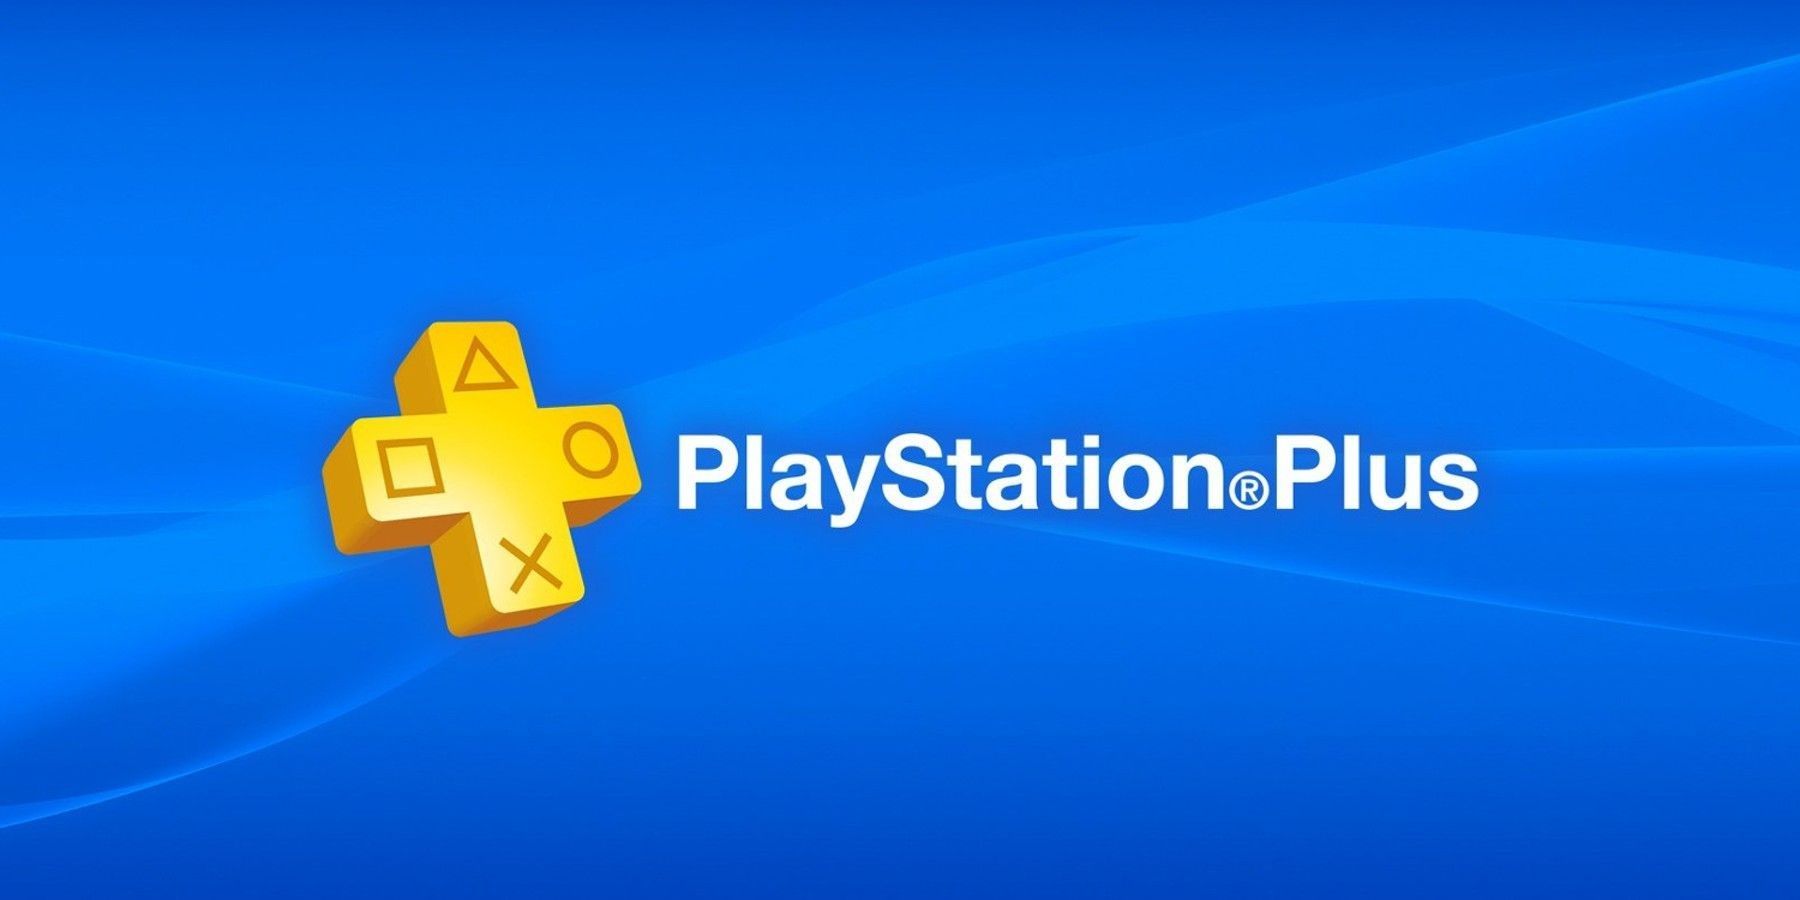 playstation plus extra and premium may 2023 file sizes